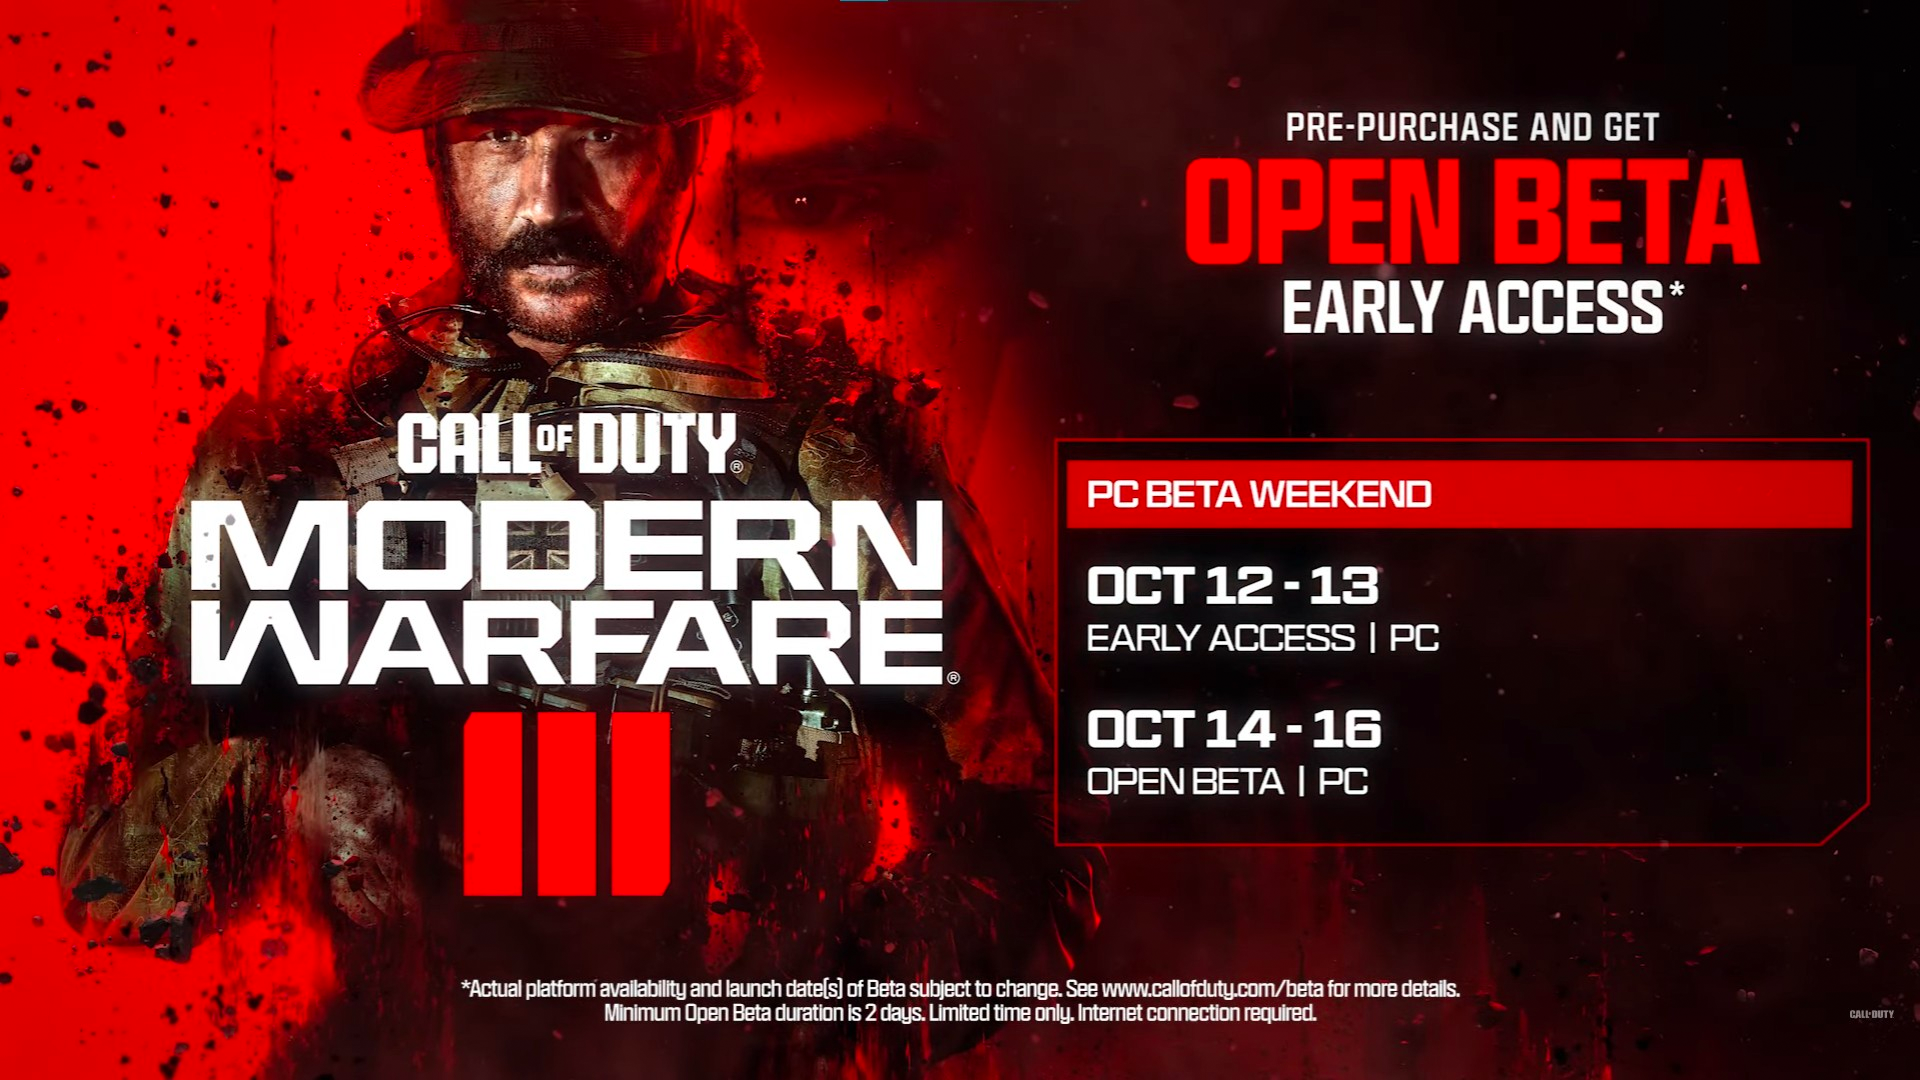 The Modern Warfare 3 beta starts on PC and all other platforms on Oct 14